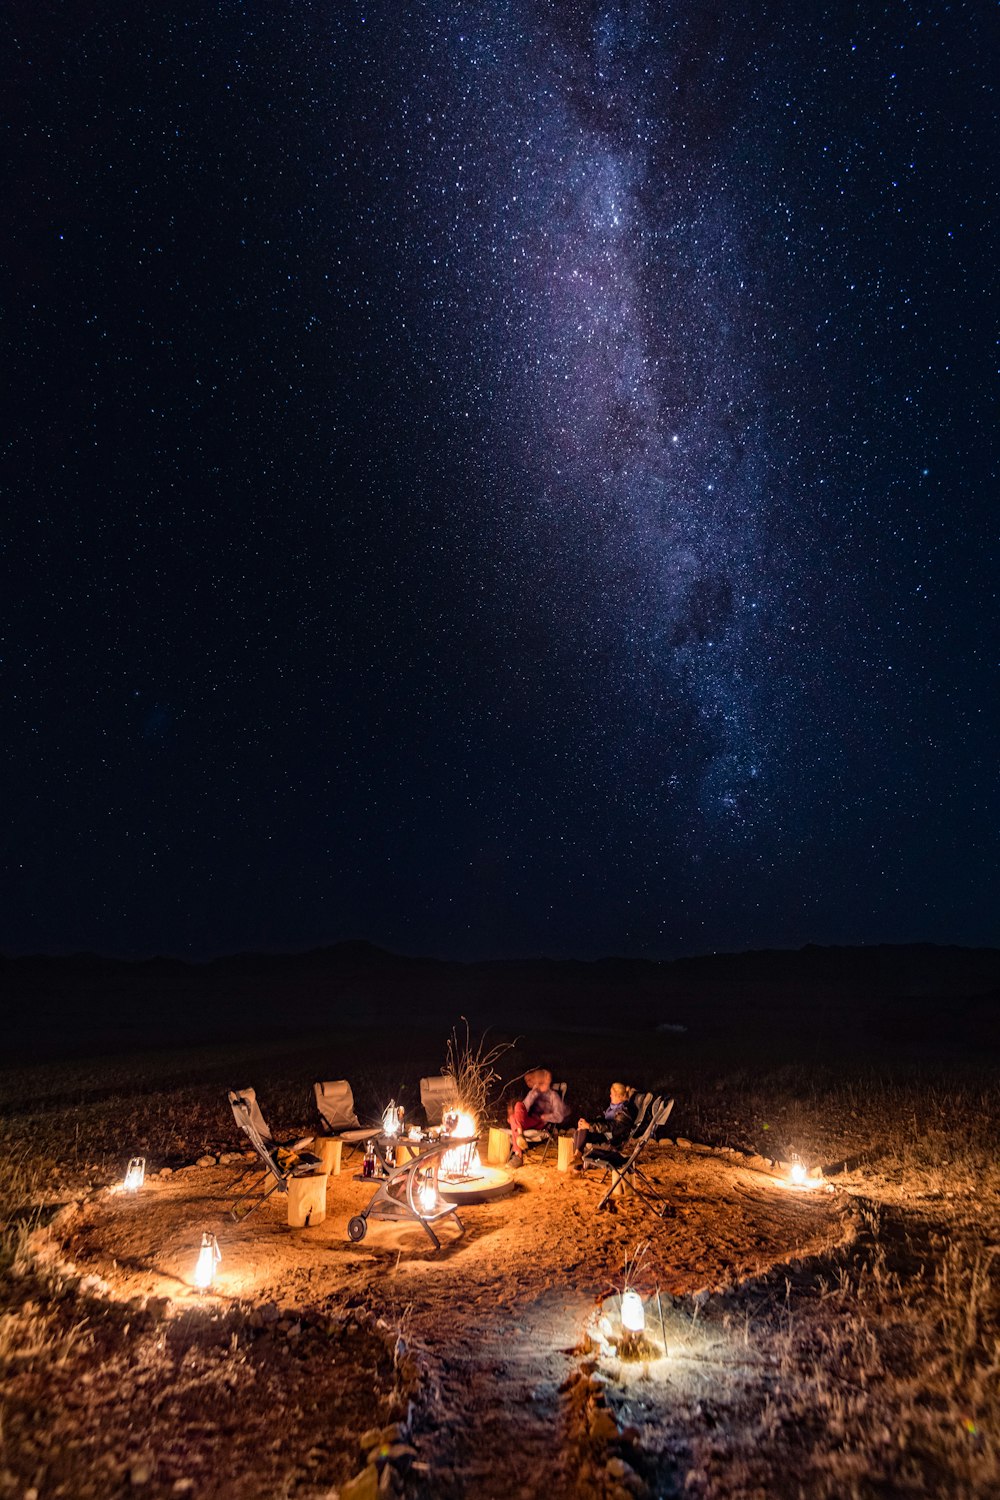 a group of people sitting around a campfire under a night sky filled with stars